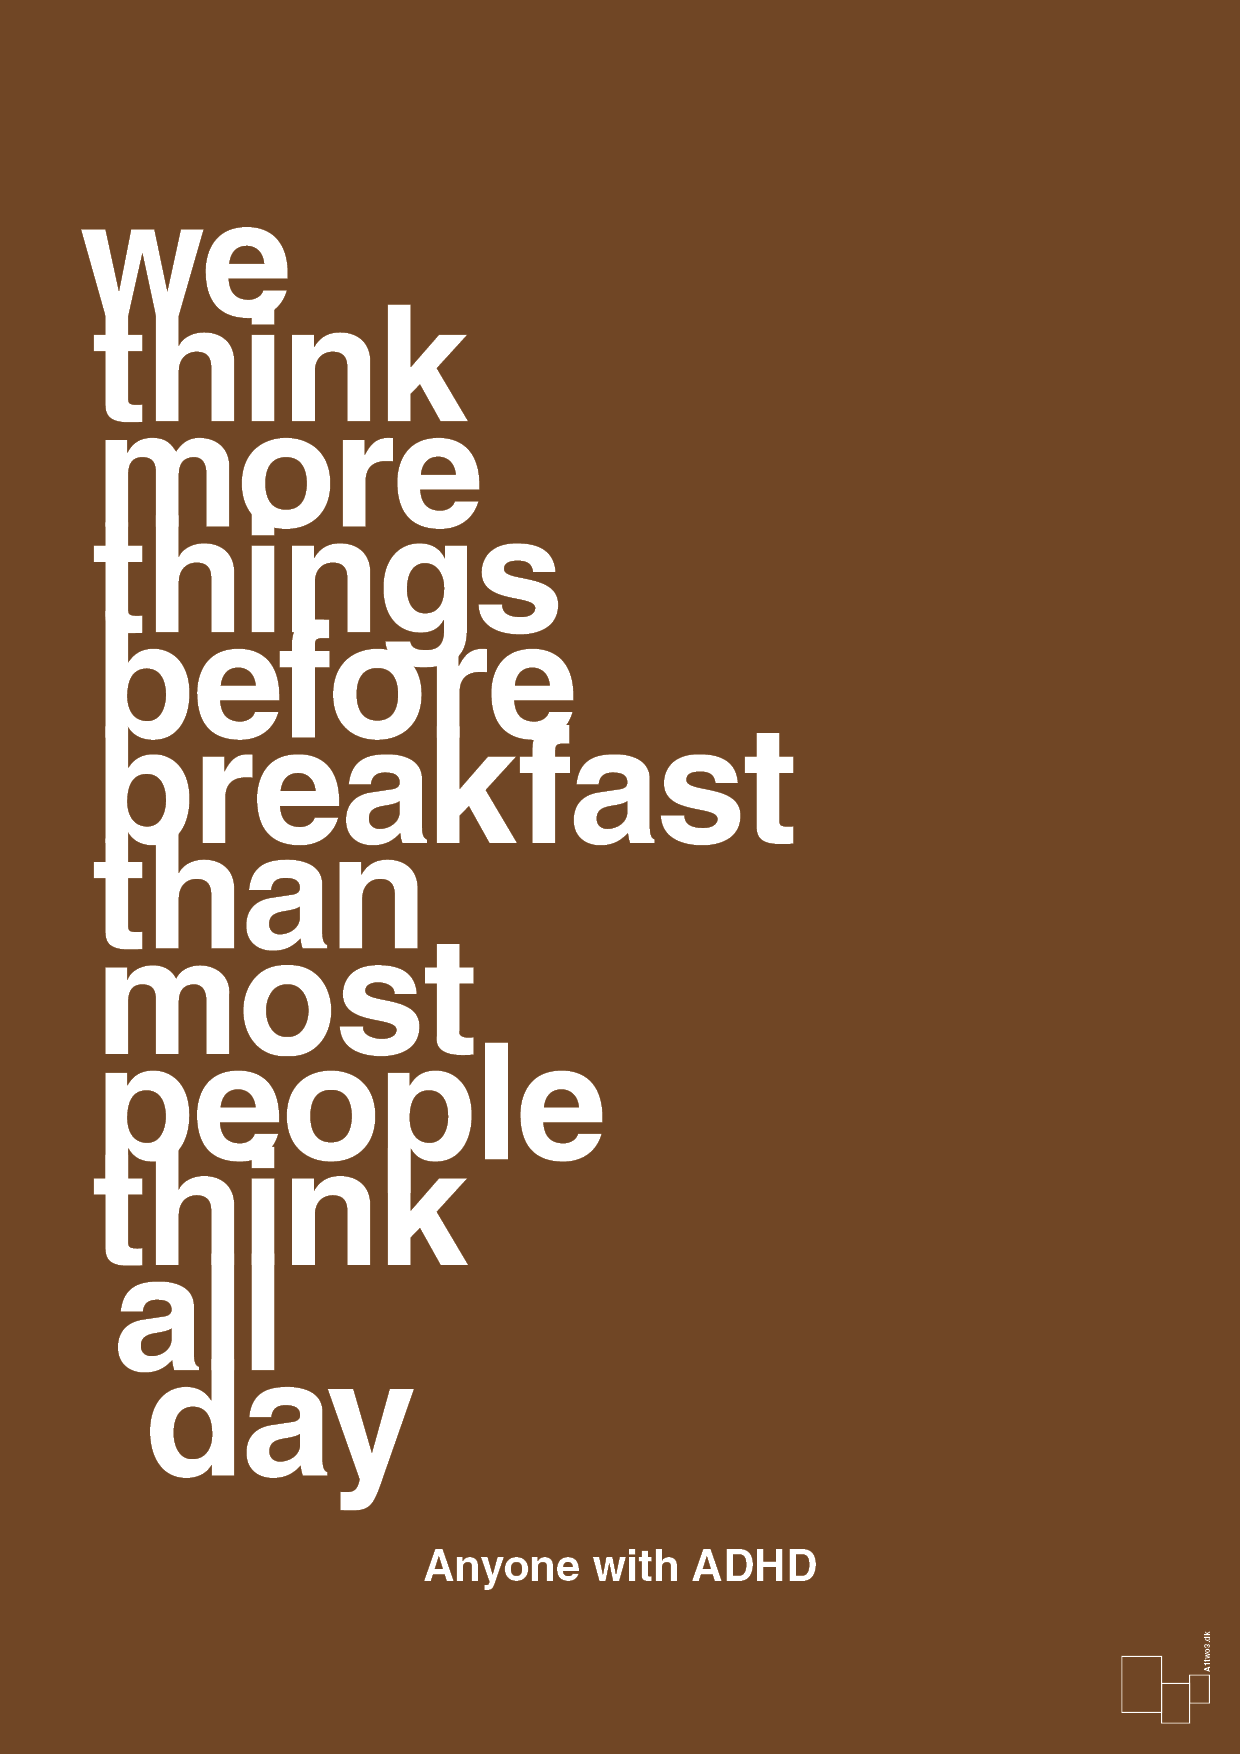 we think more things before breakfast than most people think all day - Plakat med Samfund i Dark Brown